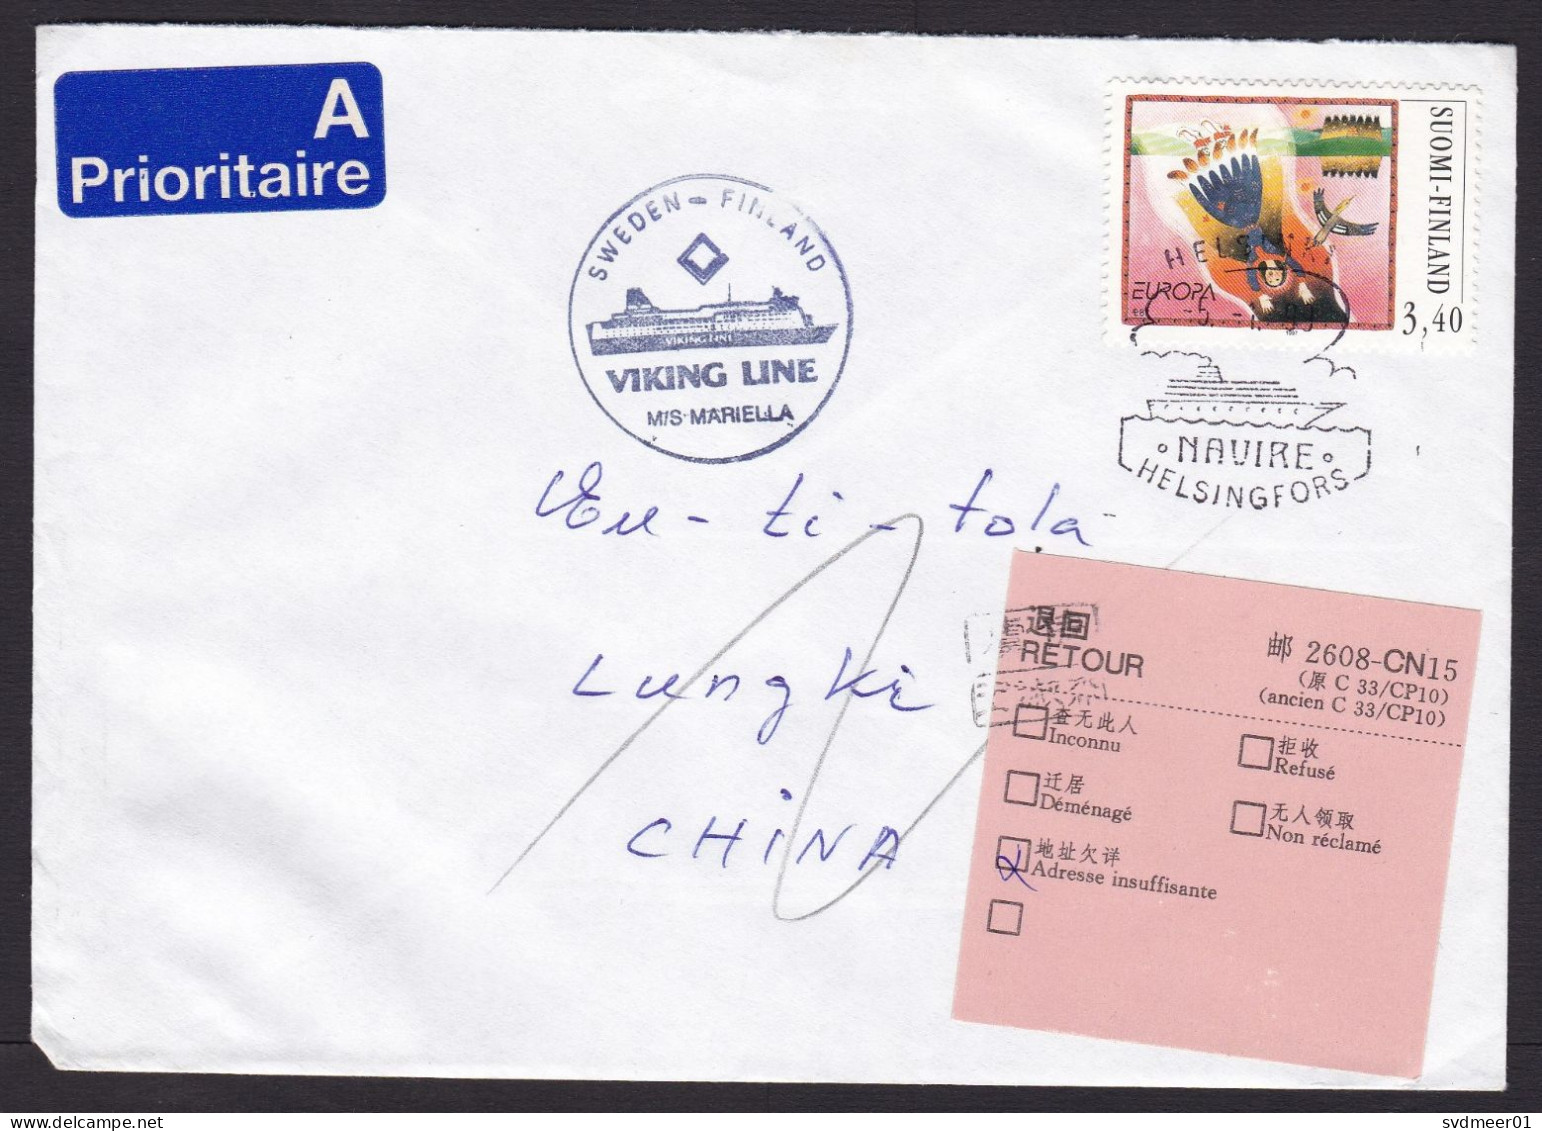 Finland: Cover To China, 1999, 1 Stamp, Ship Cancel Viking Line, Returned, CN15 Retour Label (traces Of Use) - Lettres & Documents